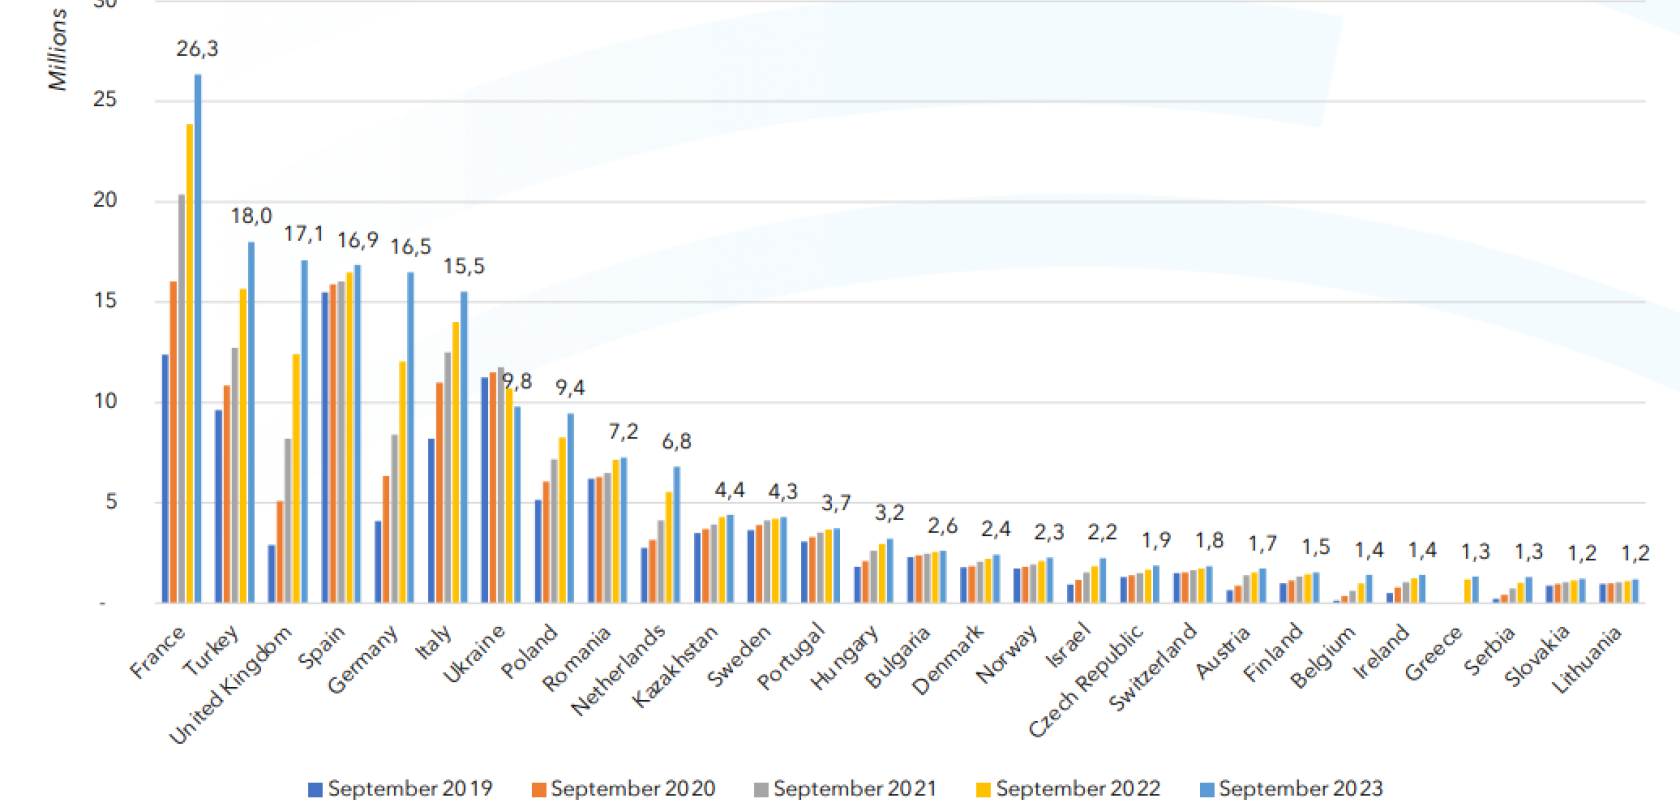 European ranking in terms of FTTH/B Homes passed (Credit: Idate for FTTH Council Europe)